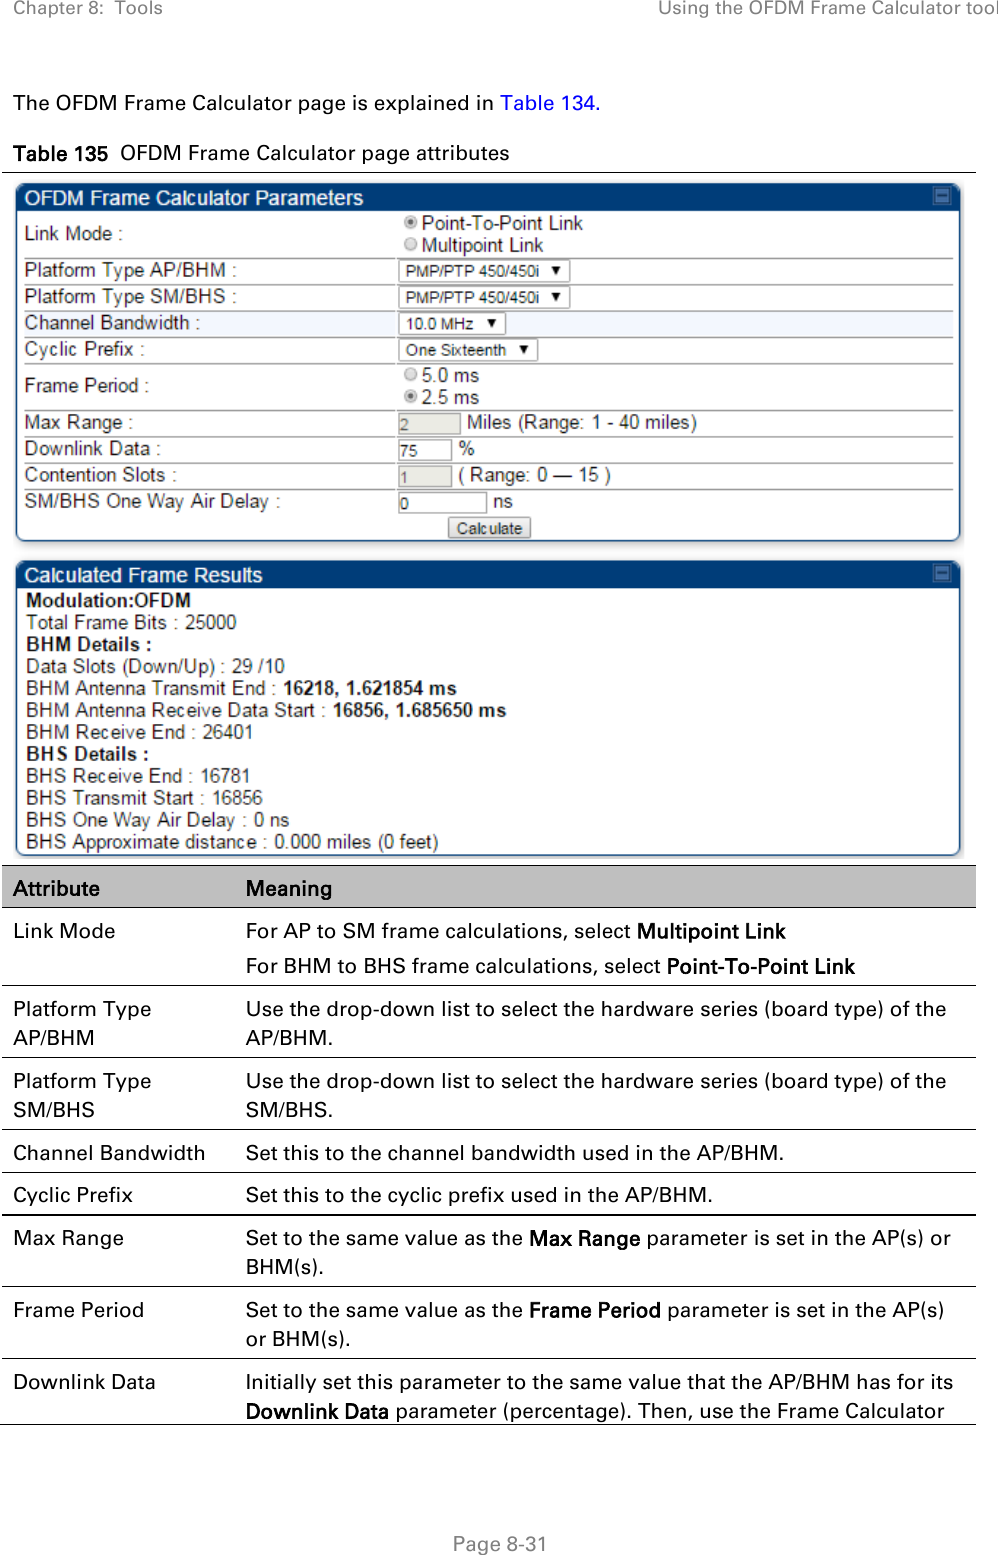 Chapter 8:  Tools Using the OFDM Frame Calculator tool   Page 8-31 The OFDM Frame Calculator page is explained in Table 134. Table 135  OFDM Frame Calculator page attributes  Attribute Meaning Link Mode For AP to SM frame calculations, select Multipoint Link For BHM to BHS frame calculations, select Point-To-Point Link Platform Type AP/BHM Use the drop-down list to select the hardware series (board type) of the AP/BHM. Platform Type SM/BHS Use the drop-down list to select the hardware series (board type) of the SM/BHS. Channel Bandwidth Set this to the channel bandwidth used in the AP/BHM. Cyclic Prefix Set this to the cyclic prefix used in the AP/BHM. Max Range Set to the same value as the Max Range parameter is set in the AP(s) or BHM(s). Frame Period Set to the same value as the Frame Period parameter is set in the AP(s) or BHM(s). Downlink Data Initially set this parameter to the same value that the AP/BHM has for its Downlink Data parameter (percentage). Then, use the Frame Calculator 